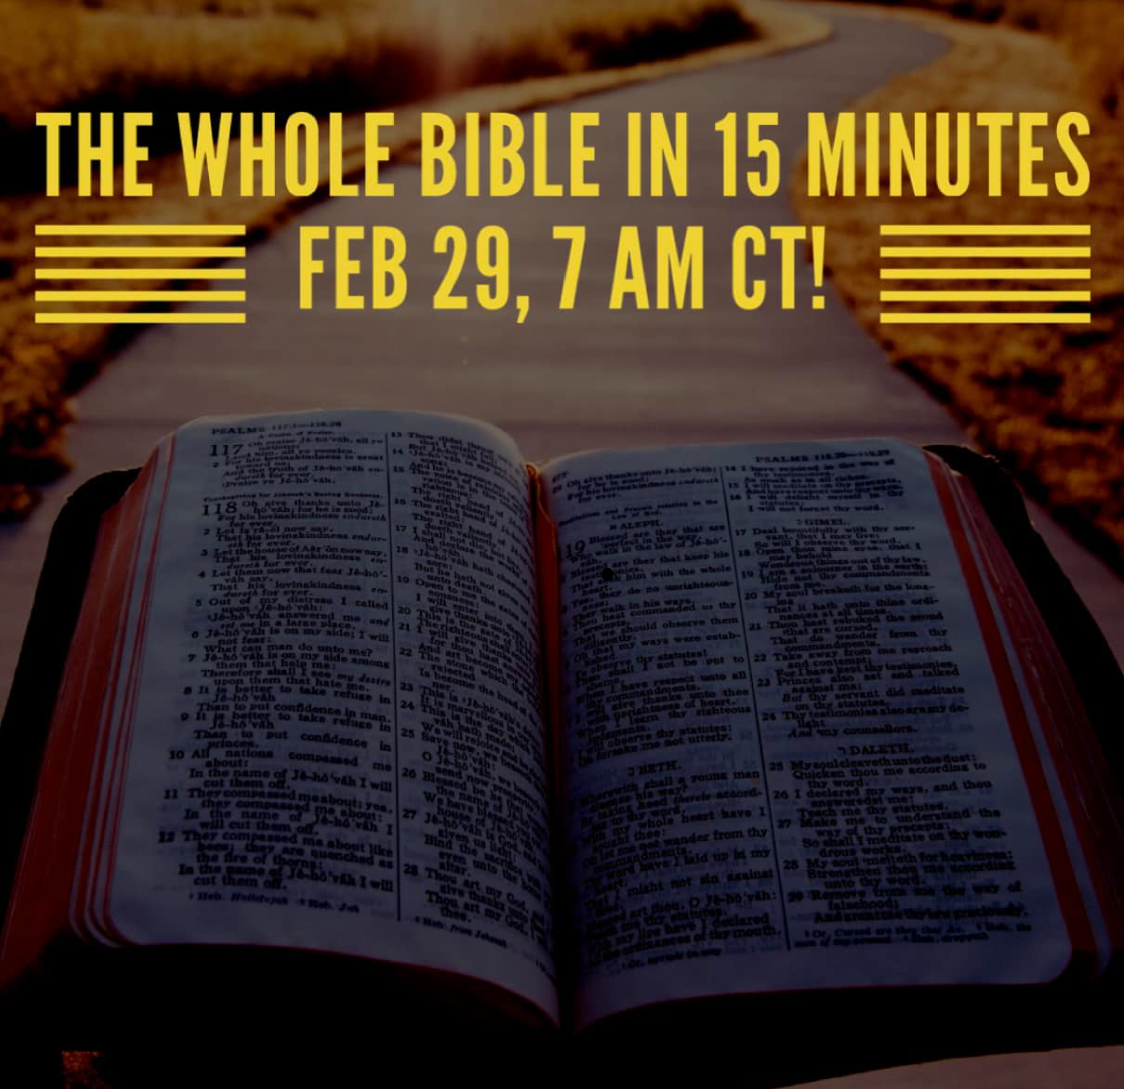 Watch “The Whole Bible in 15 Minutes” on Leap Day!